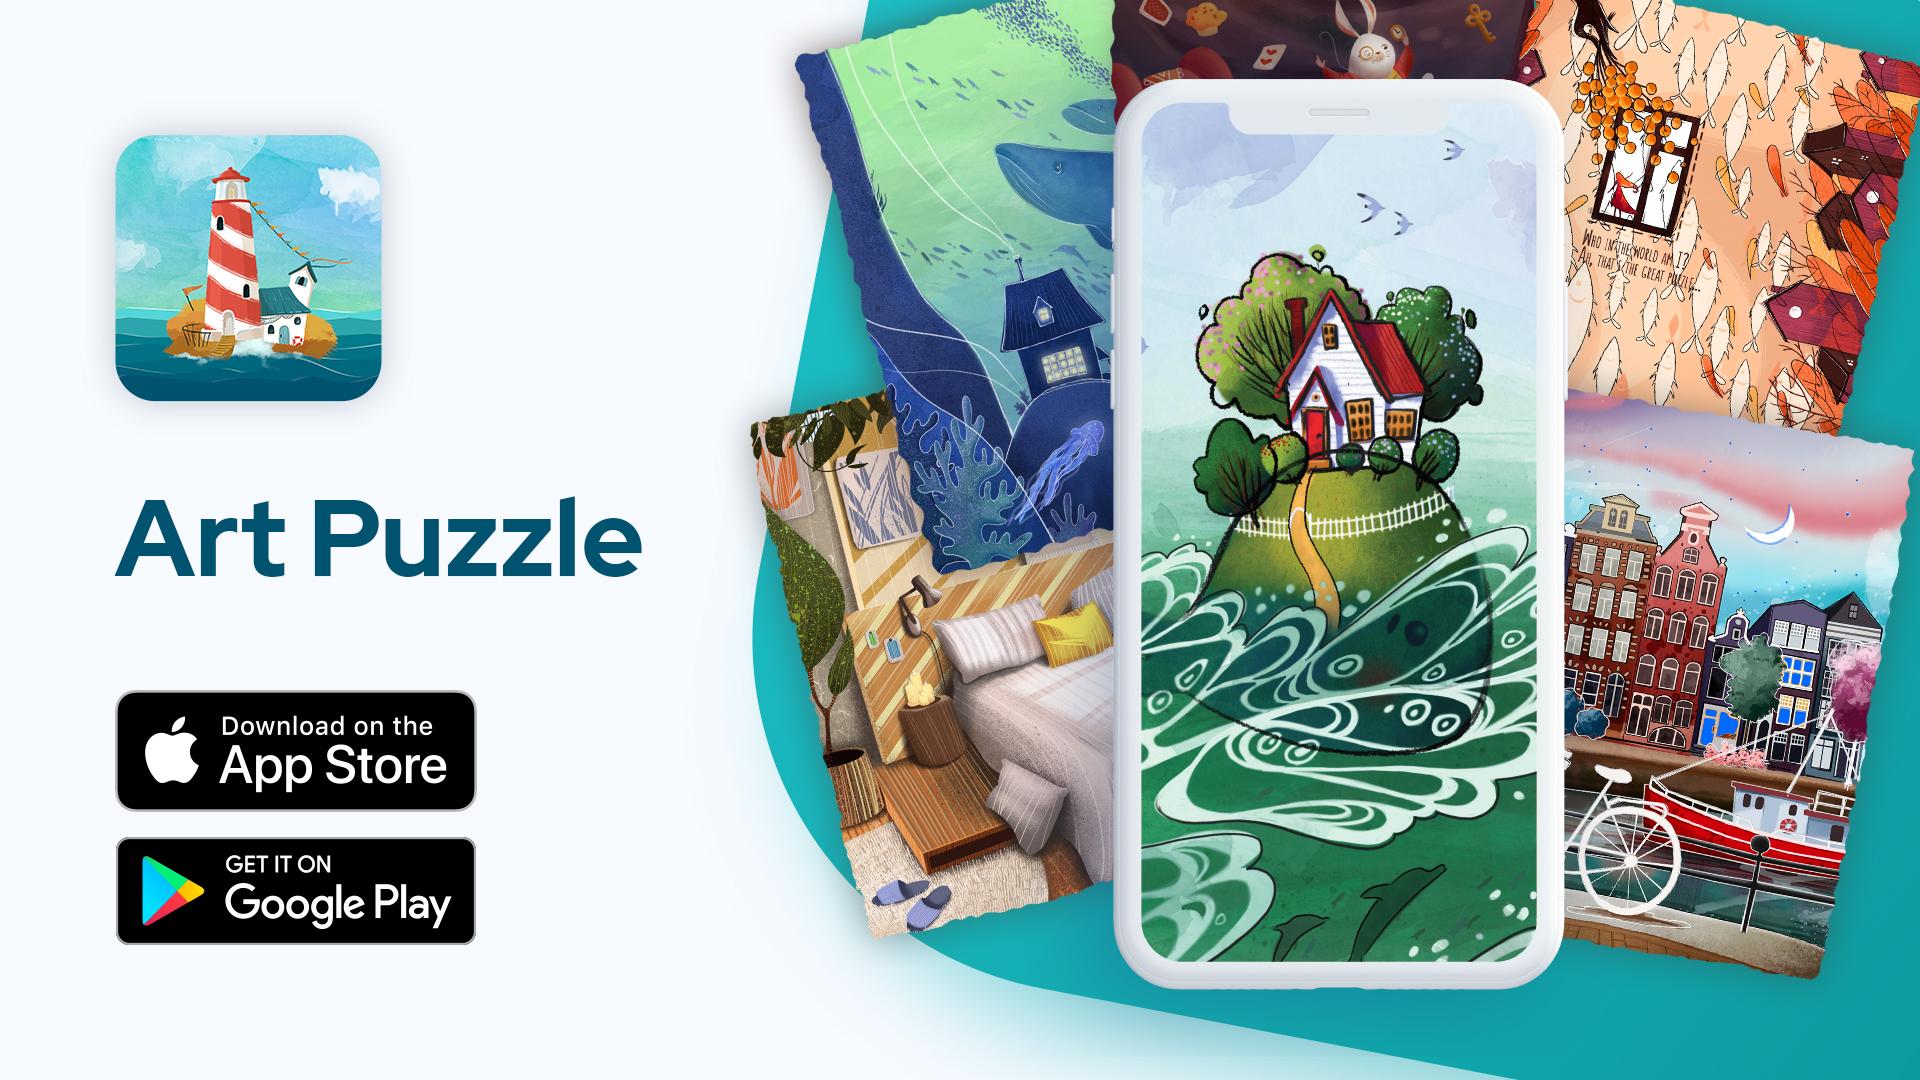 35 Top Photos Puzzle Game App Store / Ordinary Puzzles An Open Source